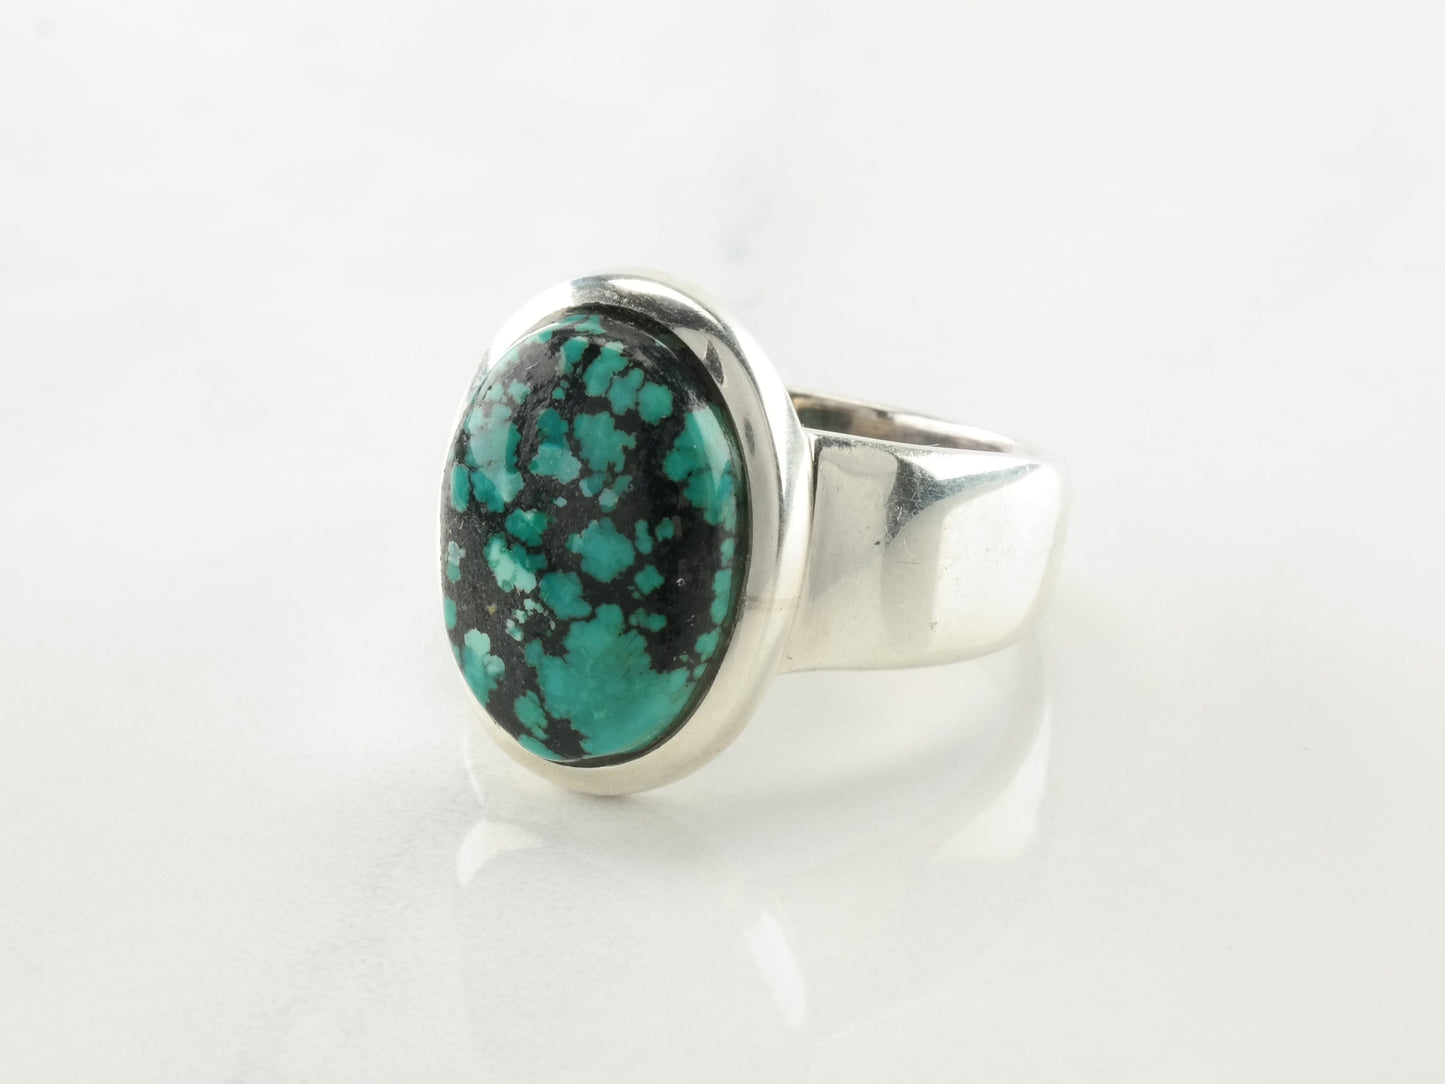 Vintage Southwest Ring Spiderweb Turquoise Sterling Silver Size 8 1/4